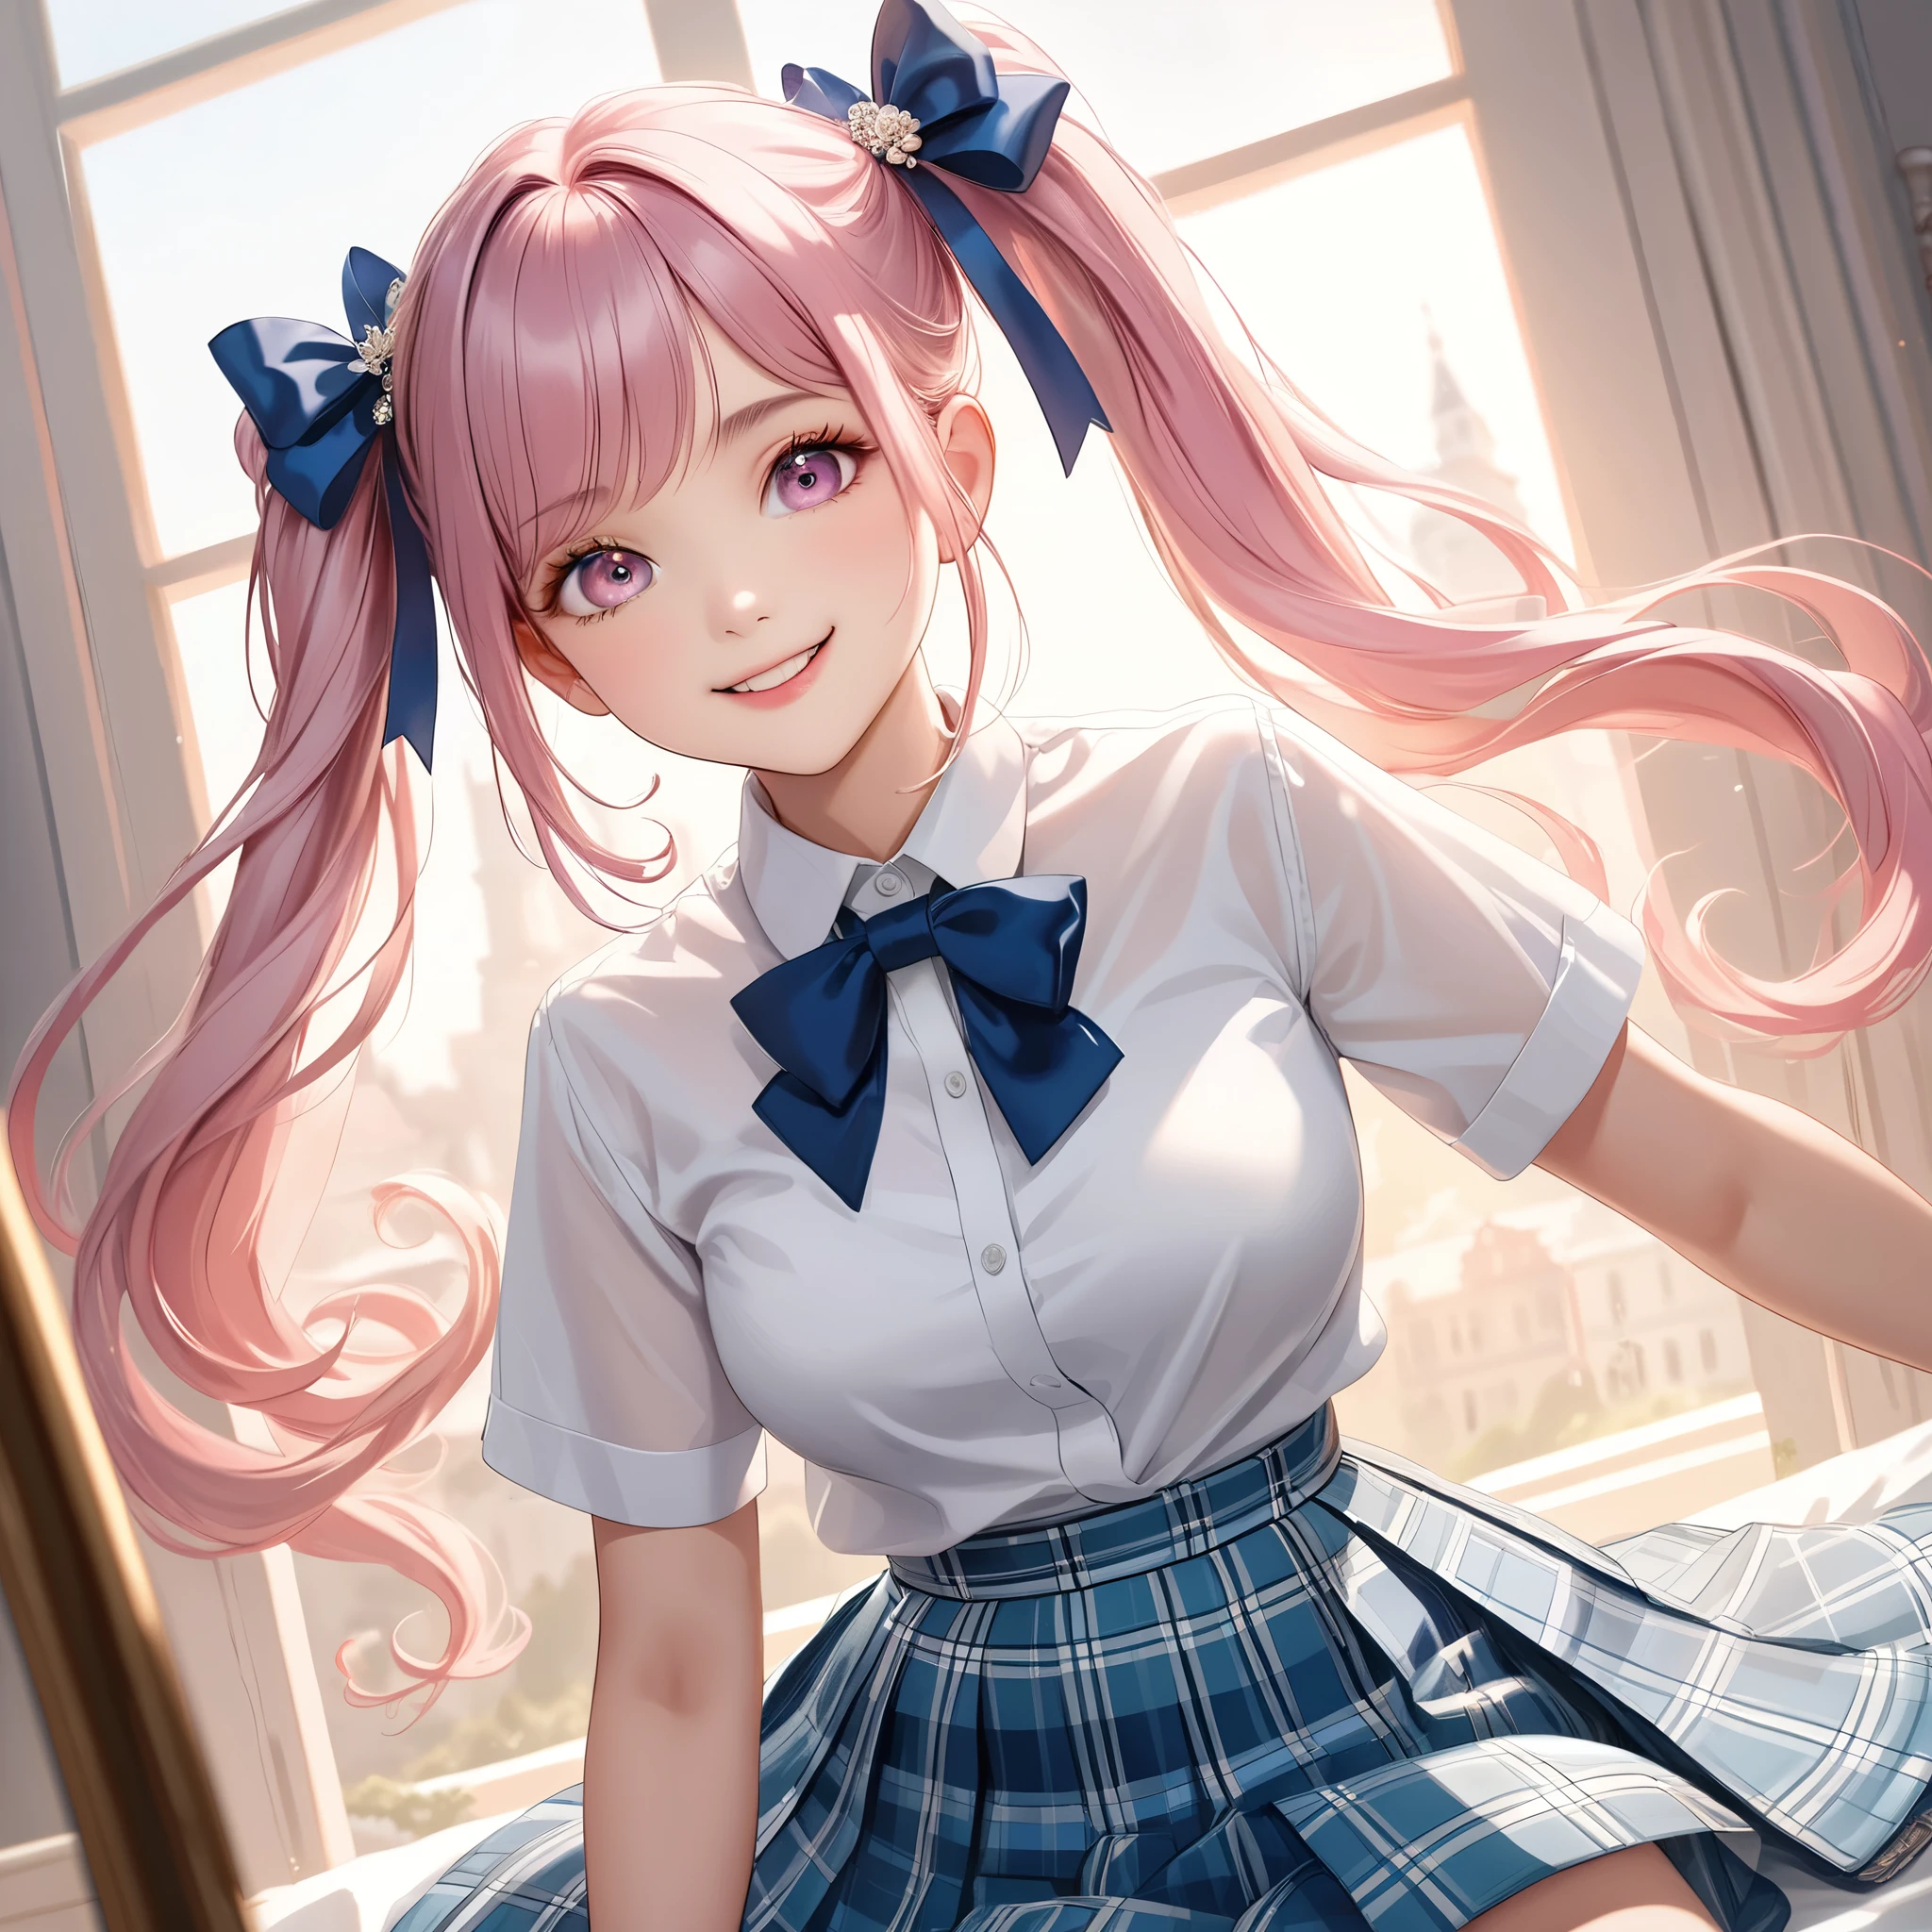 (8K, masutepiece, Highest Quality, Best Quality, Official art, Breathtaking beauty and aesthetics, A highly detailed, The best masterpiece in history that exceeds limits, Breathtaking and beautiful lighting:1.2), (1 Absolute Beautiful Girl, Solo), (sixteen years old), (beautiful detailed face), (shiny white skin), (beautiful detailed pink twin tails hair, Bangs:1.3), (beautiful detailed adolable drooing pink eyes:1.3), (high school uniform), (white shirt, pastel blue Tartan Plaid pleated skirt, patsel blue ribbon:1.3), (Beautiful big bust:1.3), (happy smile, Beautiful smile, Gentle smile, cute smile, innocent smile:1.2), (Attractive, amazing, Beautiful, Elegant, Luxurious, magnifica, Happy, Eye-catching, the ultimate beauty, Supreme Beauty, Superlative beauty, Elegant, Graceful, Everyone loves it, Beauty that fascinates everyone, Healed, The highest level of complete beauty, cute like an idol, Stylish like a fashion model, Goddess-like grace, Be loved, cute little, adolable), Look at the camera, cute pose, breathtaking scenery, (ultra detailed realistic Beautiful high school study, morning:1.3),